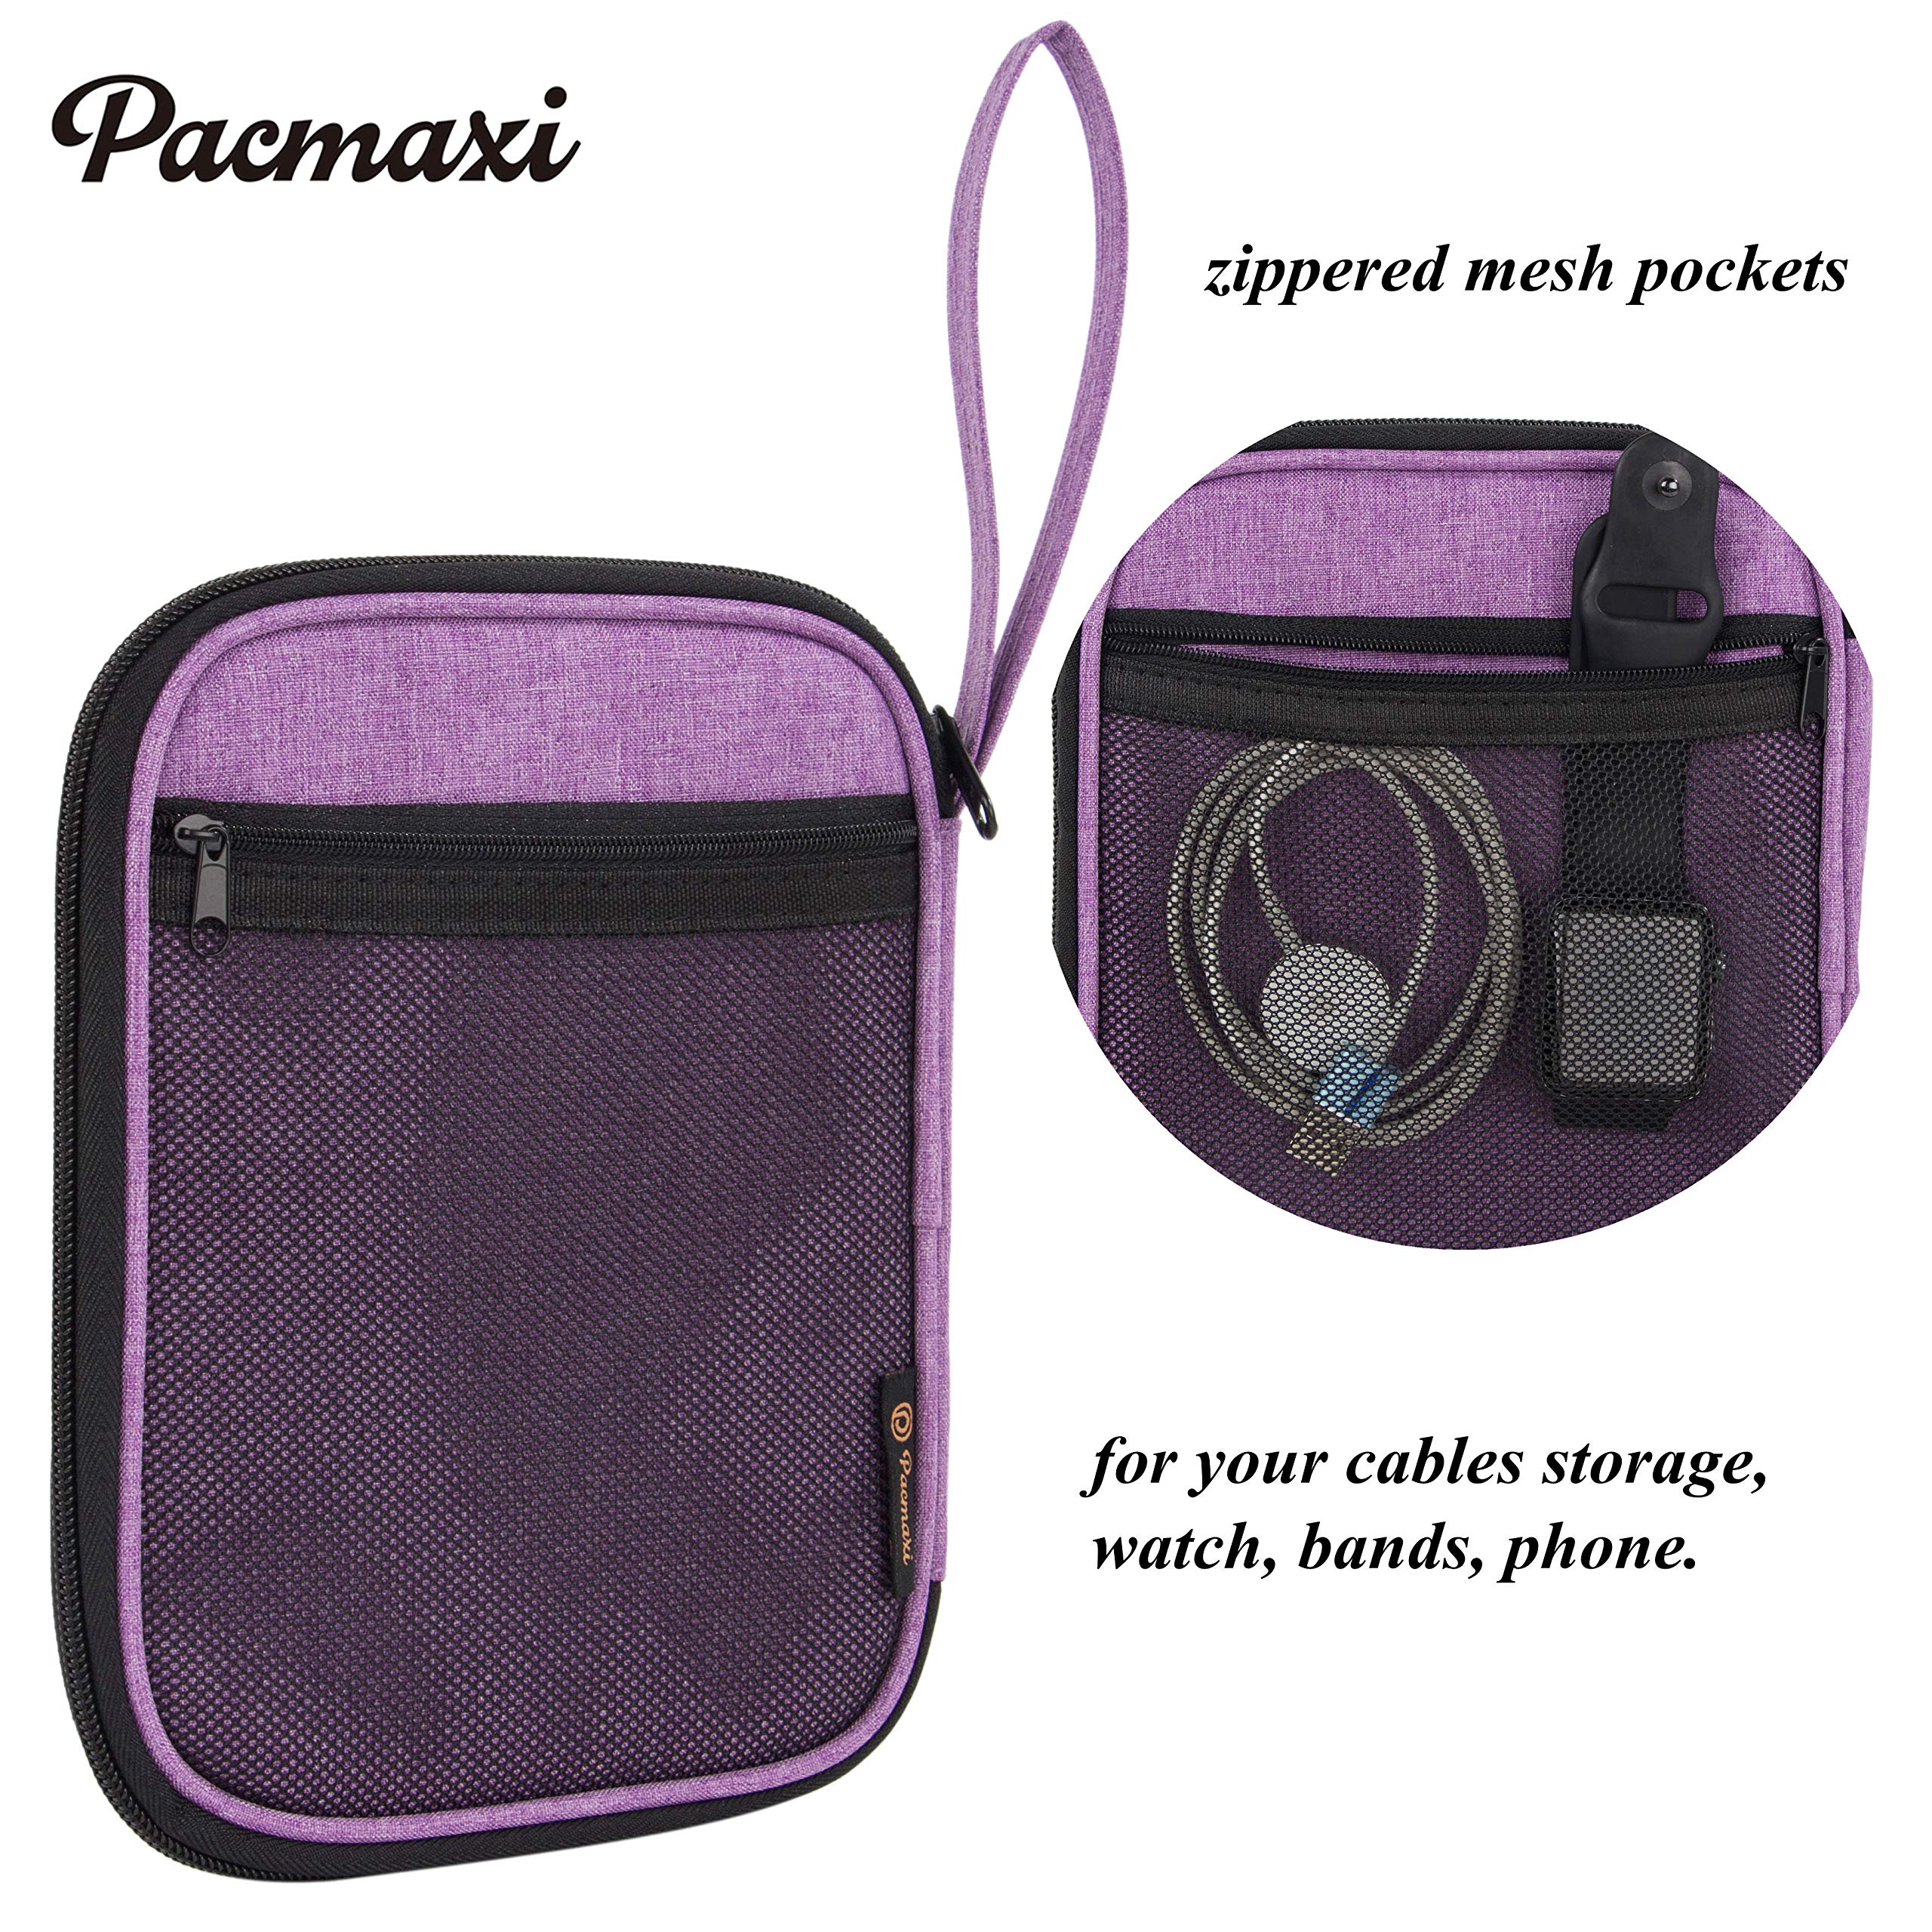 PACMAXI Watch Band Storage Organizer Holds 10 Watch Bands, Travel Watch Straps Carrying Case, Watch Band Storage Bag, (purple)